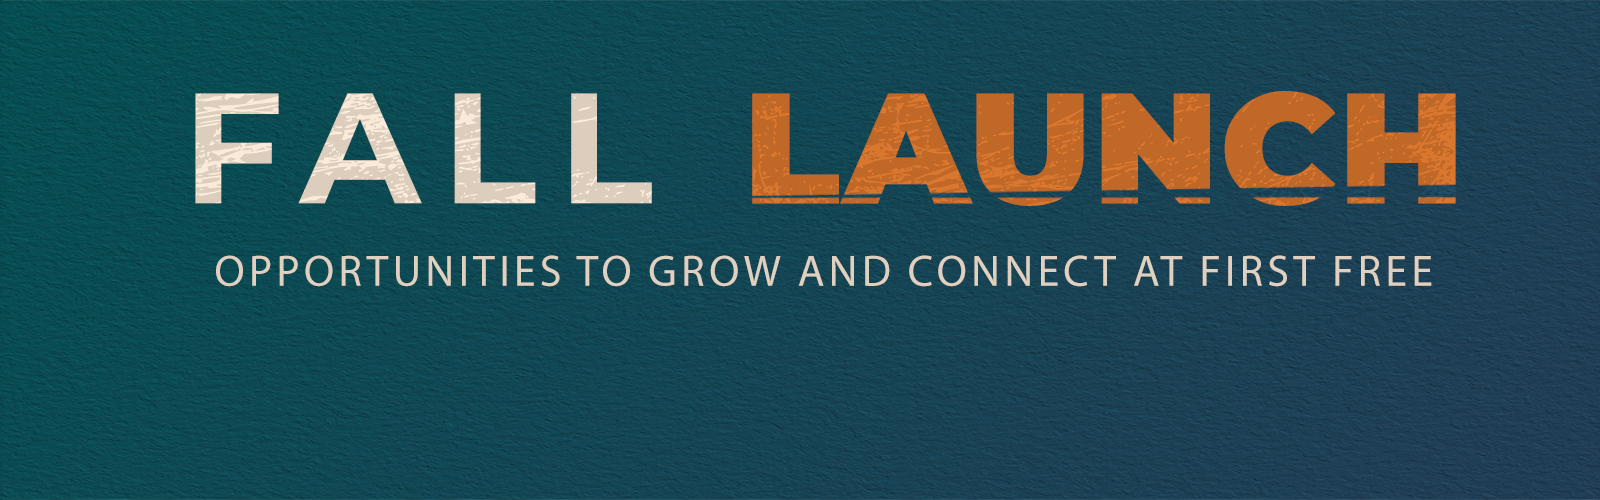 Fall Launch: Opportunities to grow and connect at first free